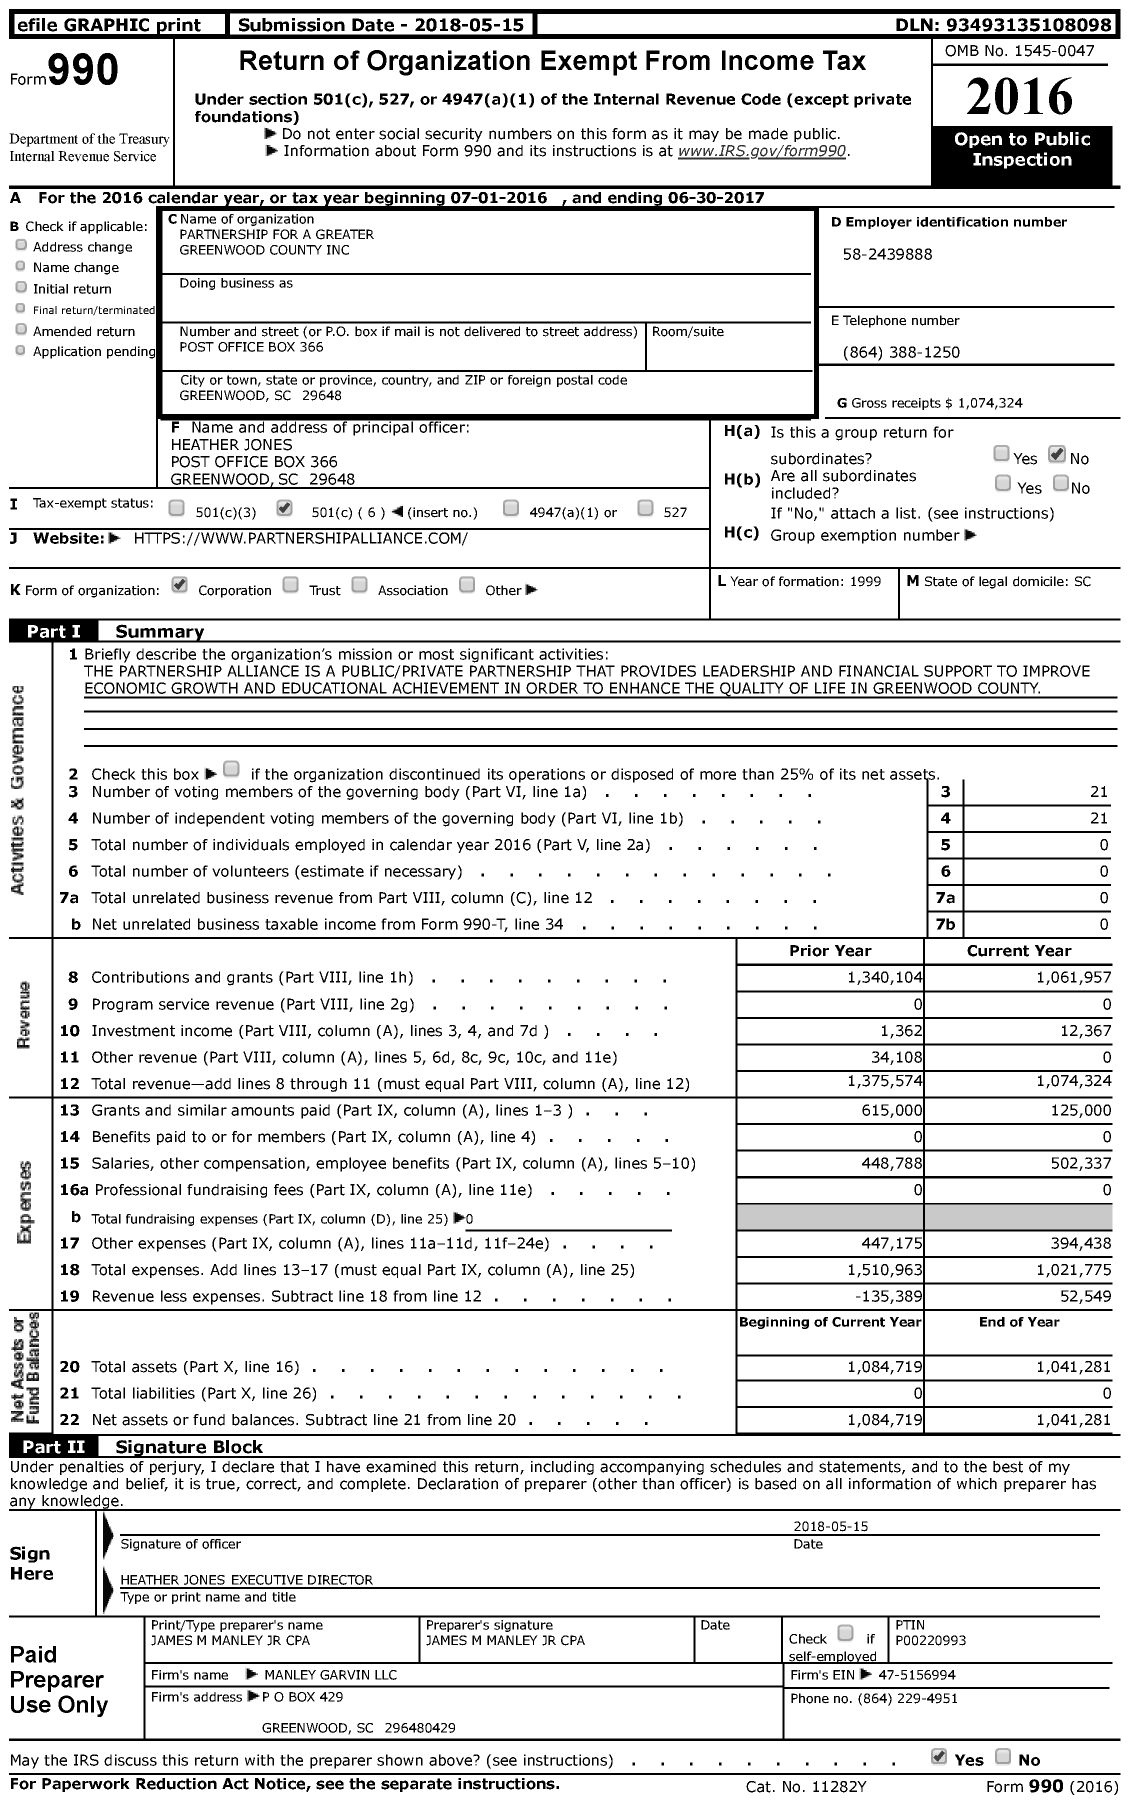 Image of first page of 2016 Form 990 for Greenwood Partnership Alliance (GPA)